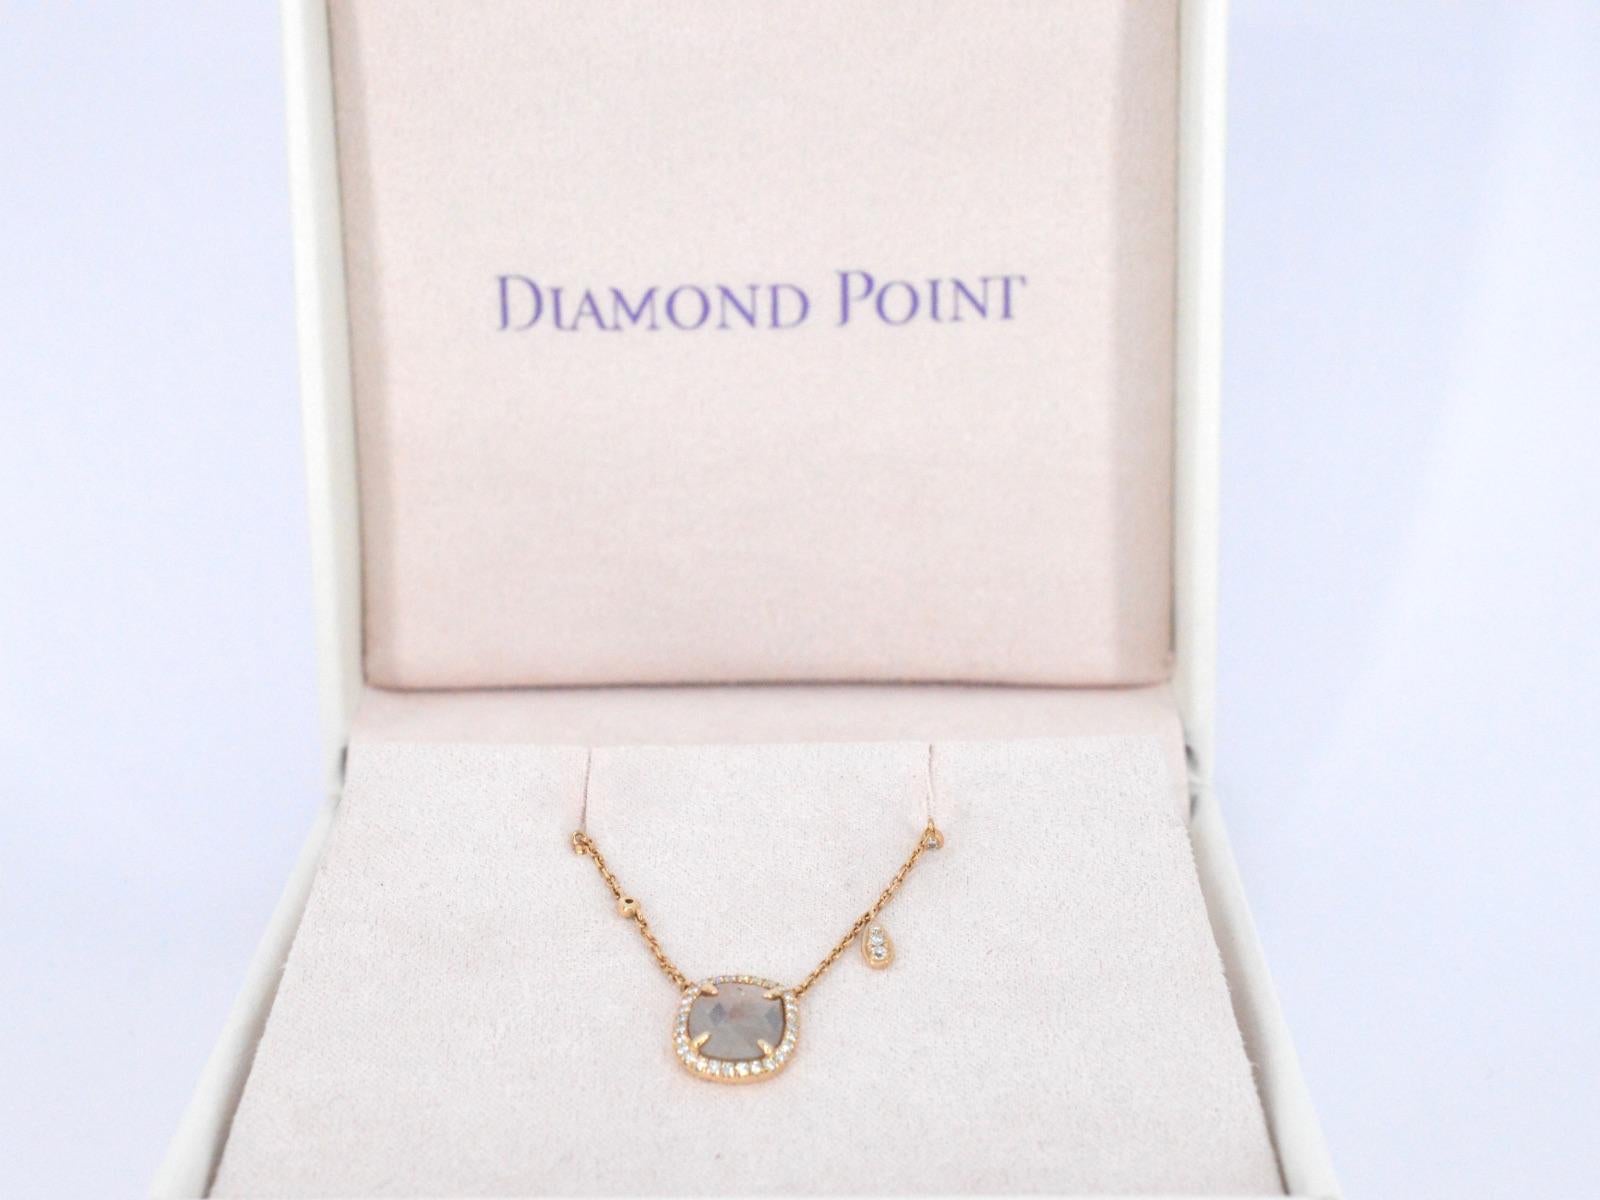 Indulge in the captivating allure of this Diamond Point necklace, a true testament to the artistry of fine jewelry. The centerpiece of this exquisite piece is a brilliant 1.00-carat central diamond, meticulously faceted to enhance its natural